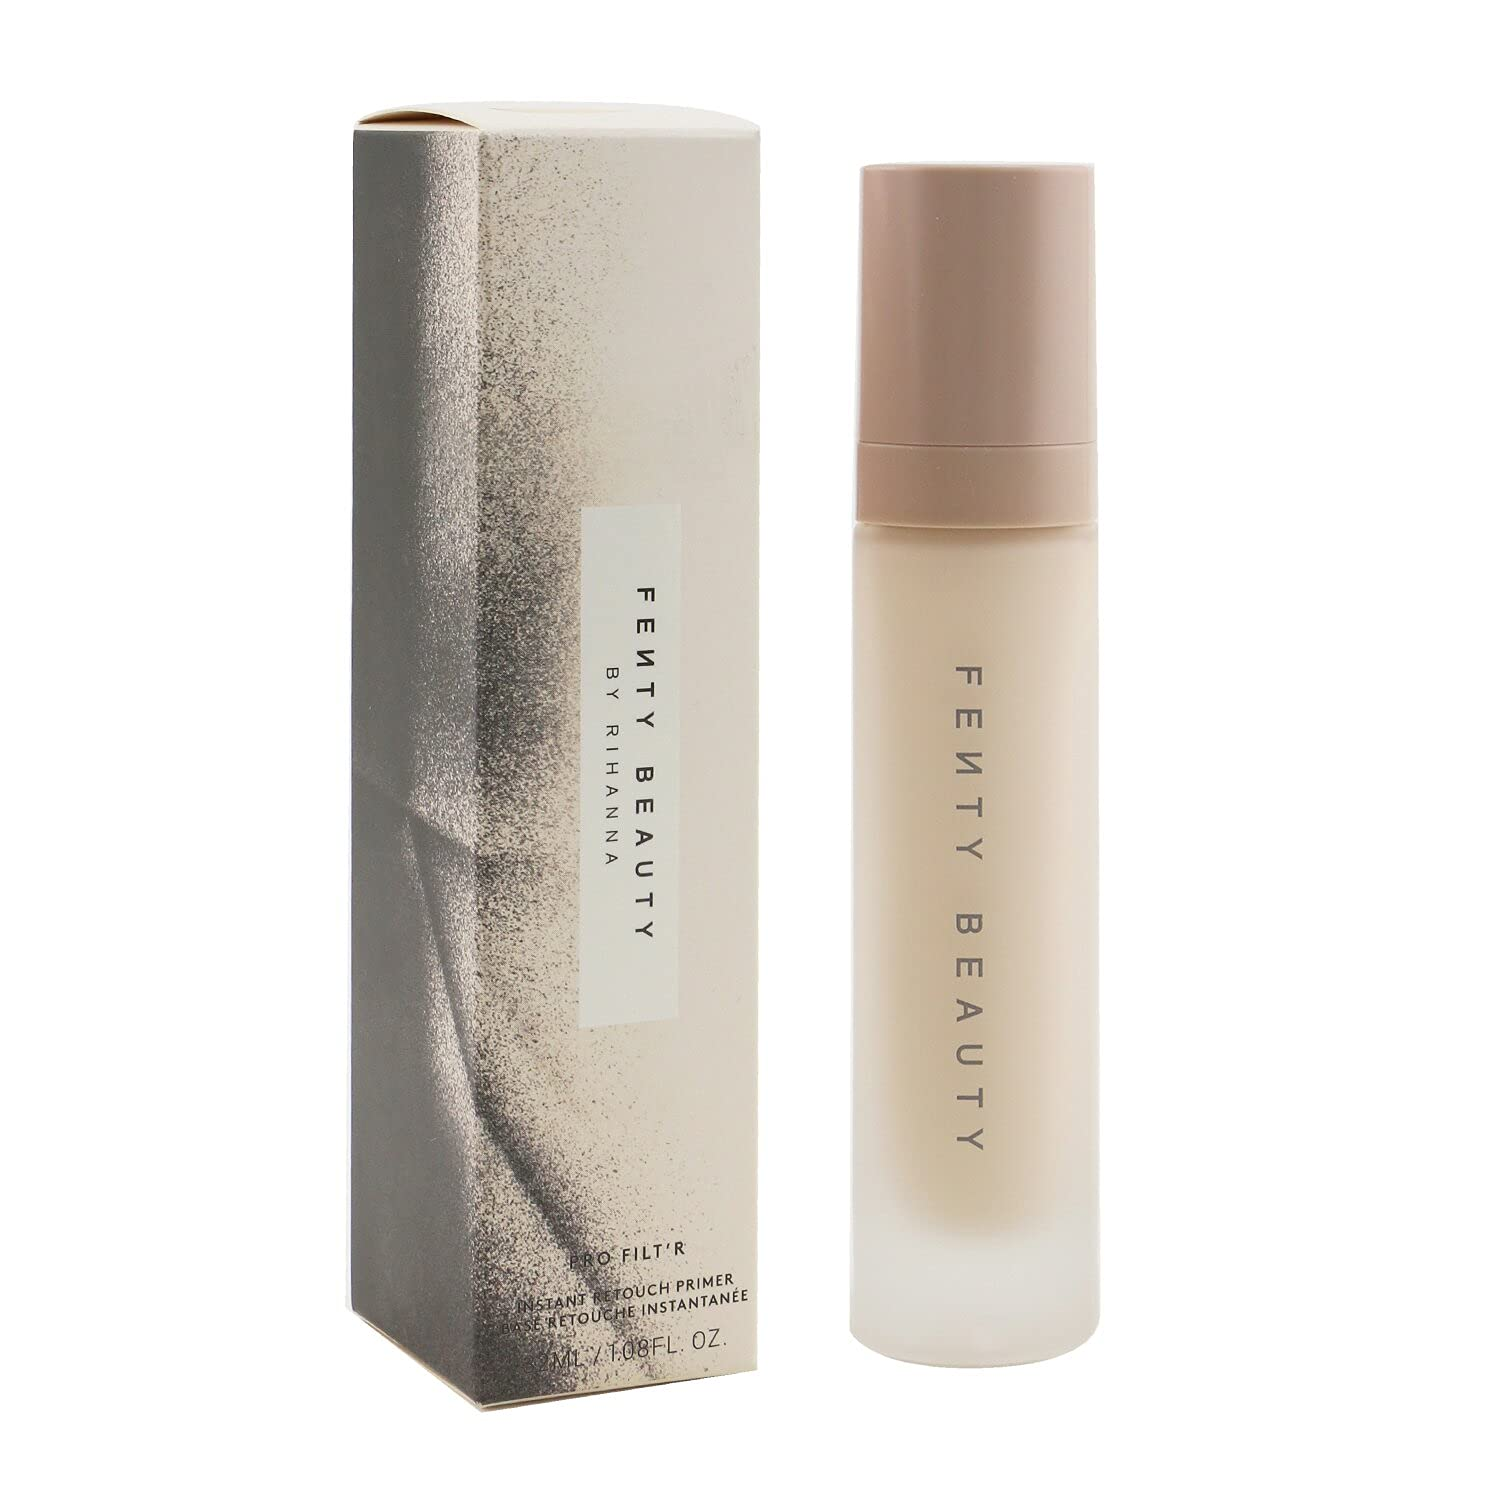 FENTY BEAUTY by Rihanna Pro Filt’r Instant Retouch Primer is one of the Best Silicone Based Primers